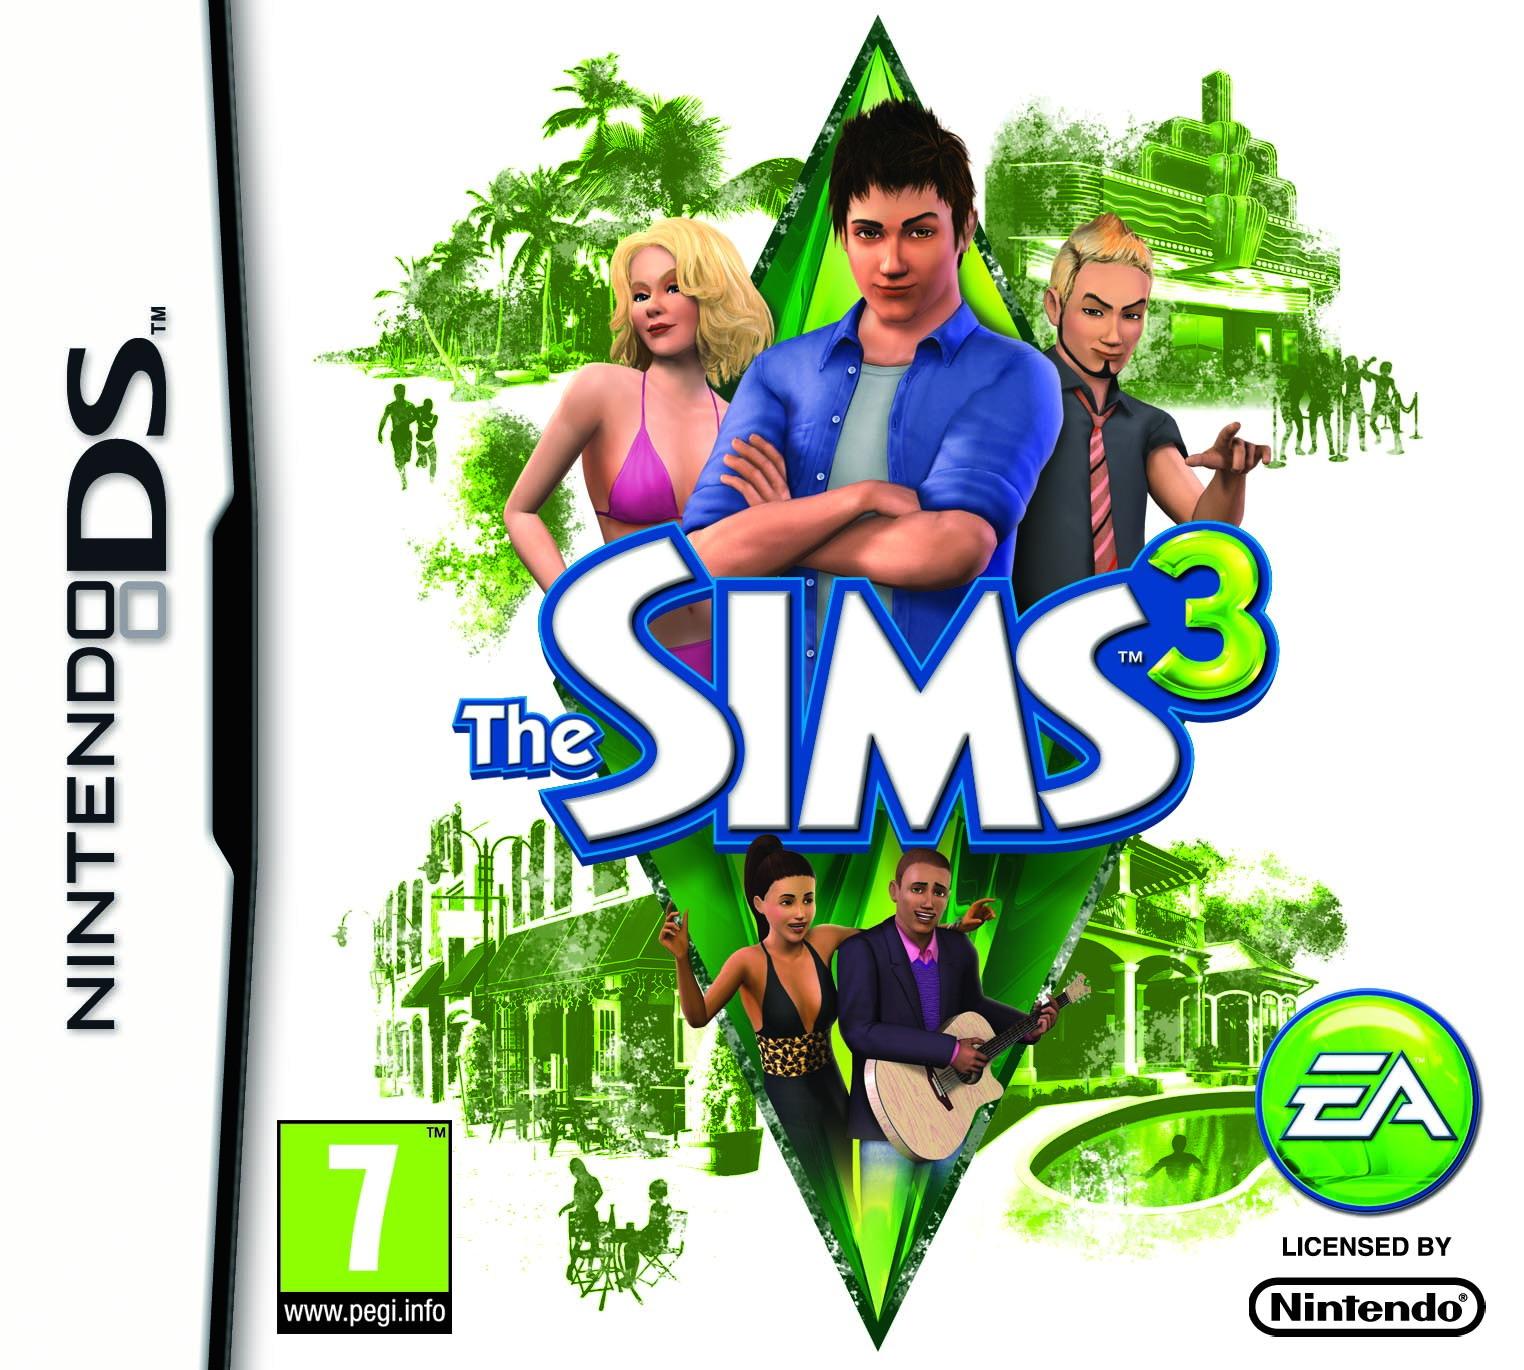 les-sims-3-nintendo-ds-les-sims-wiki-fandom-powered-by-wikia